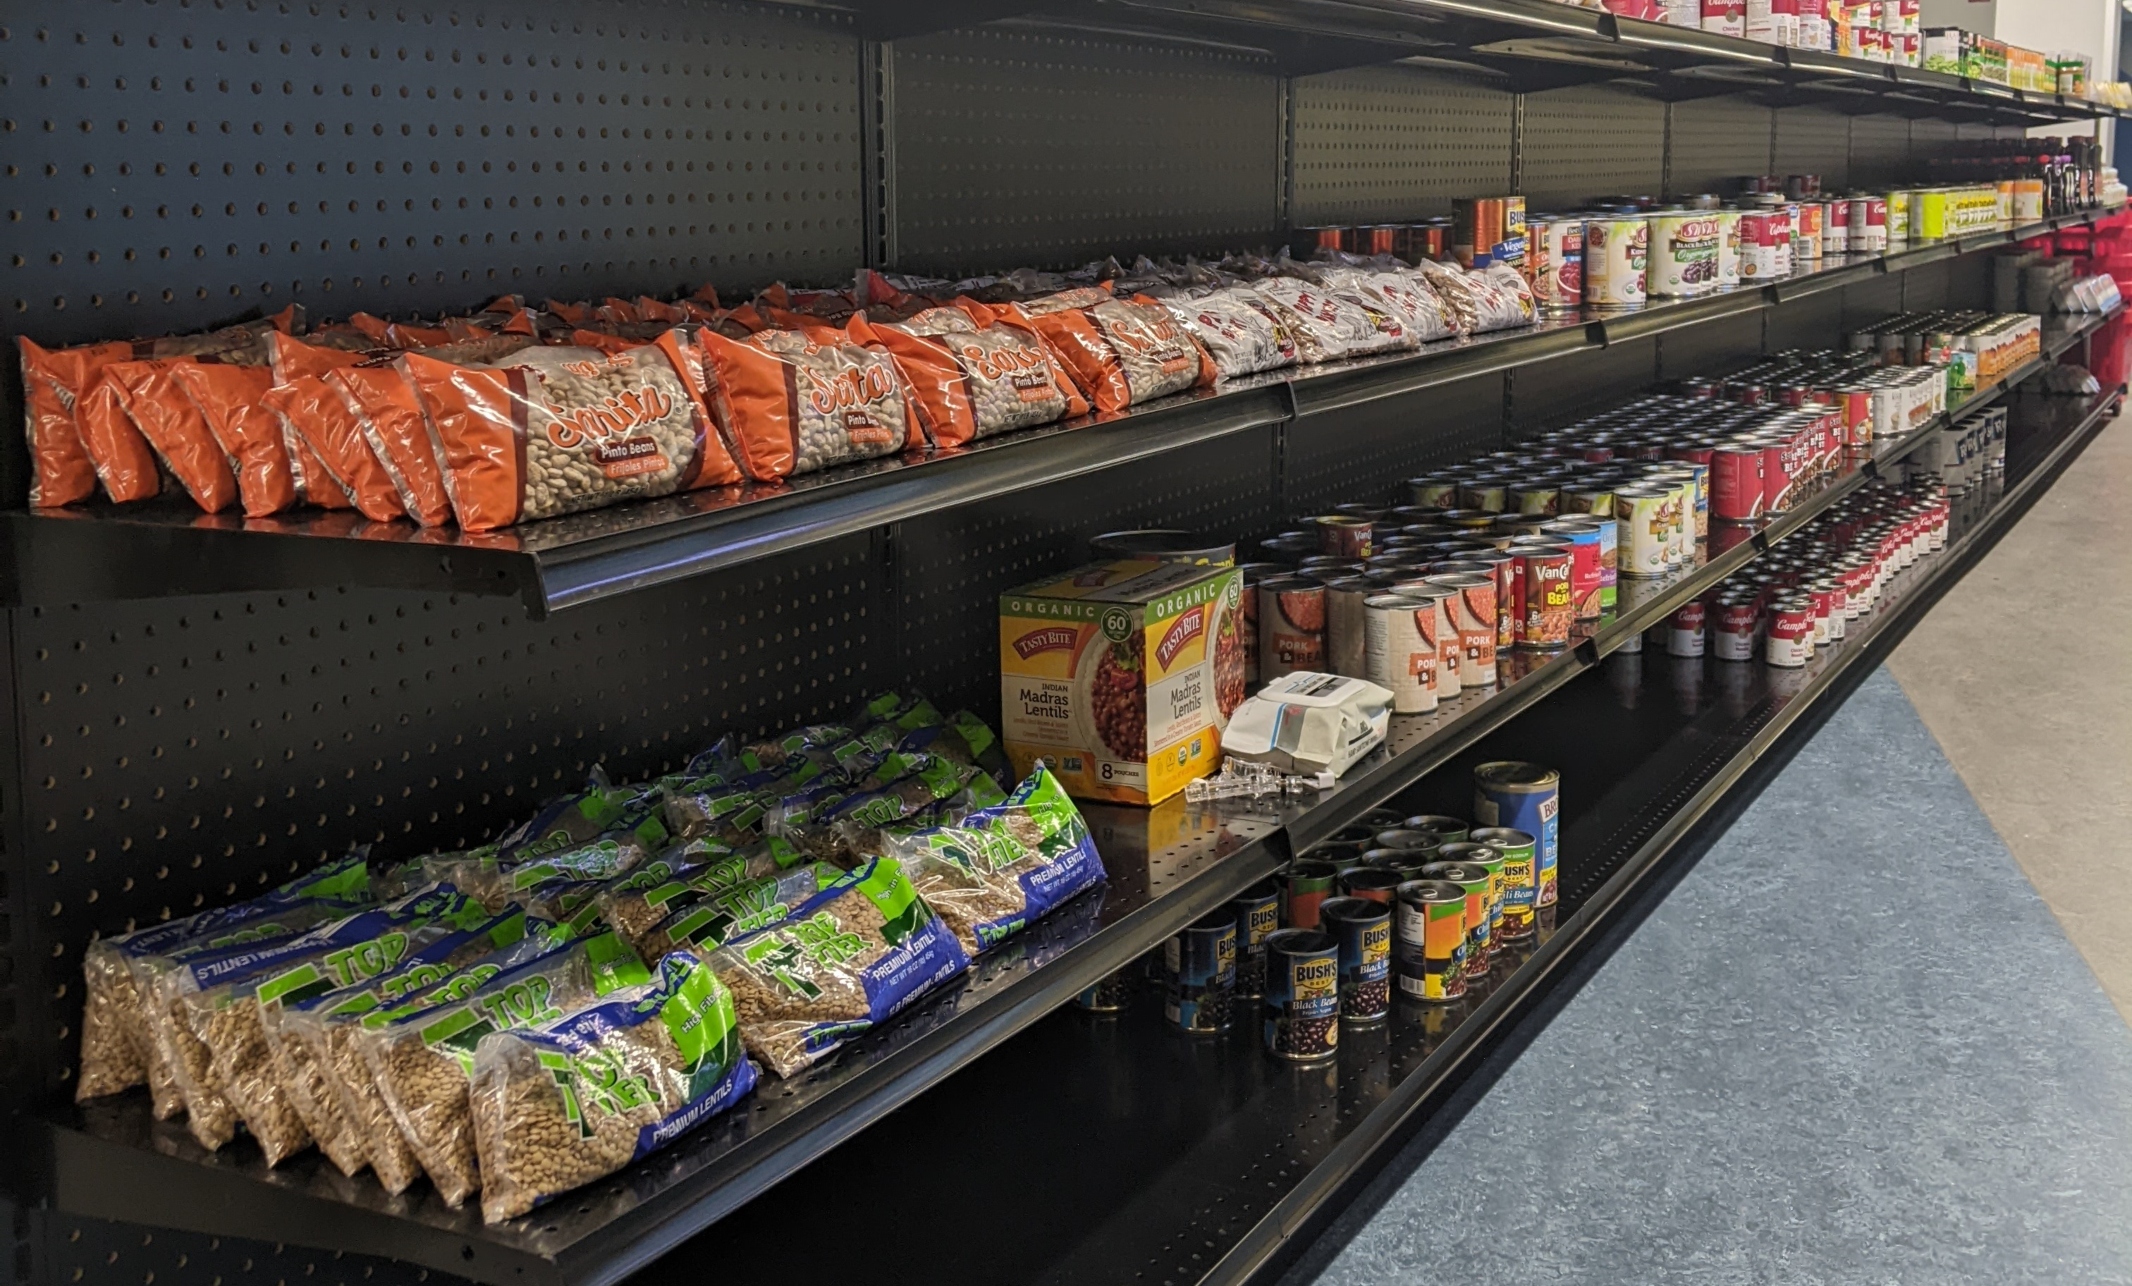 Students and faculty file into a grocery aisle of the Agrawal Care Center. The aisle features boxed and canned food items.  